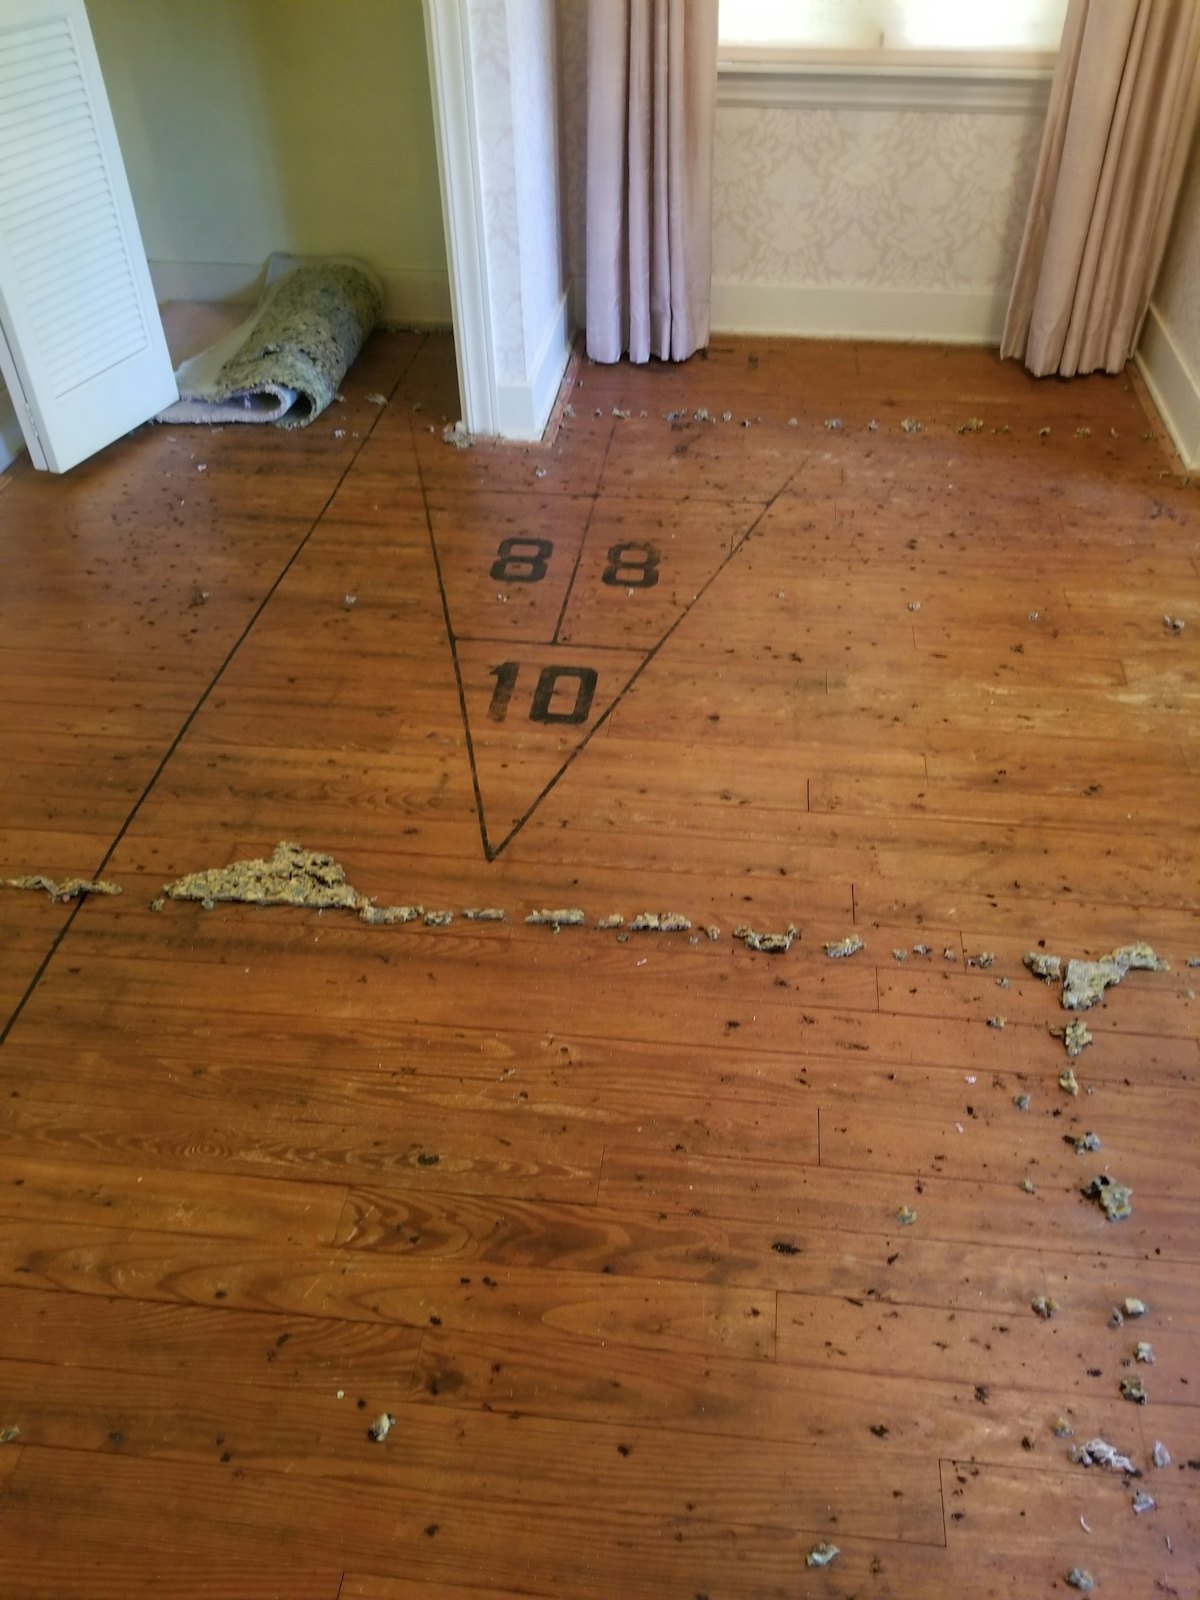 We pulled up carpet in new home and made horrifying discovery - people  think we need an exorcist